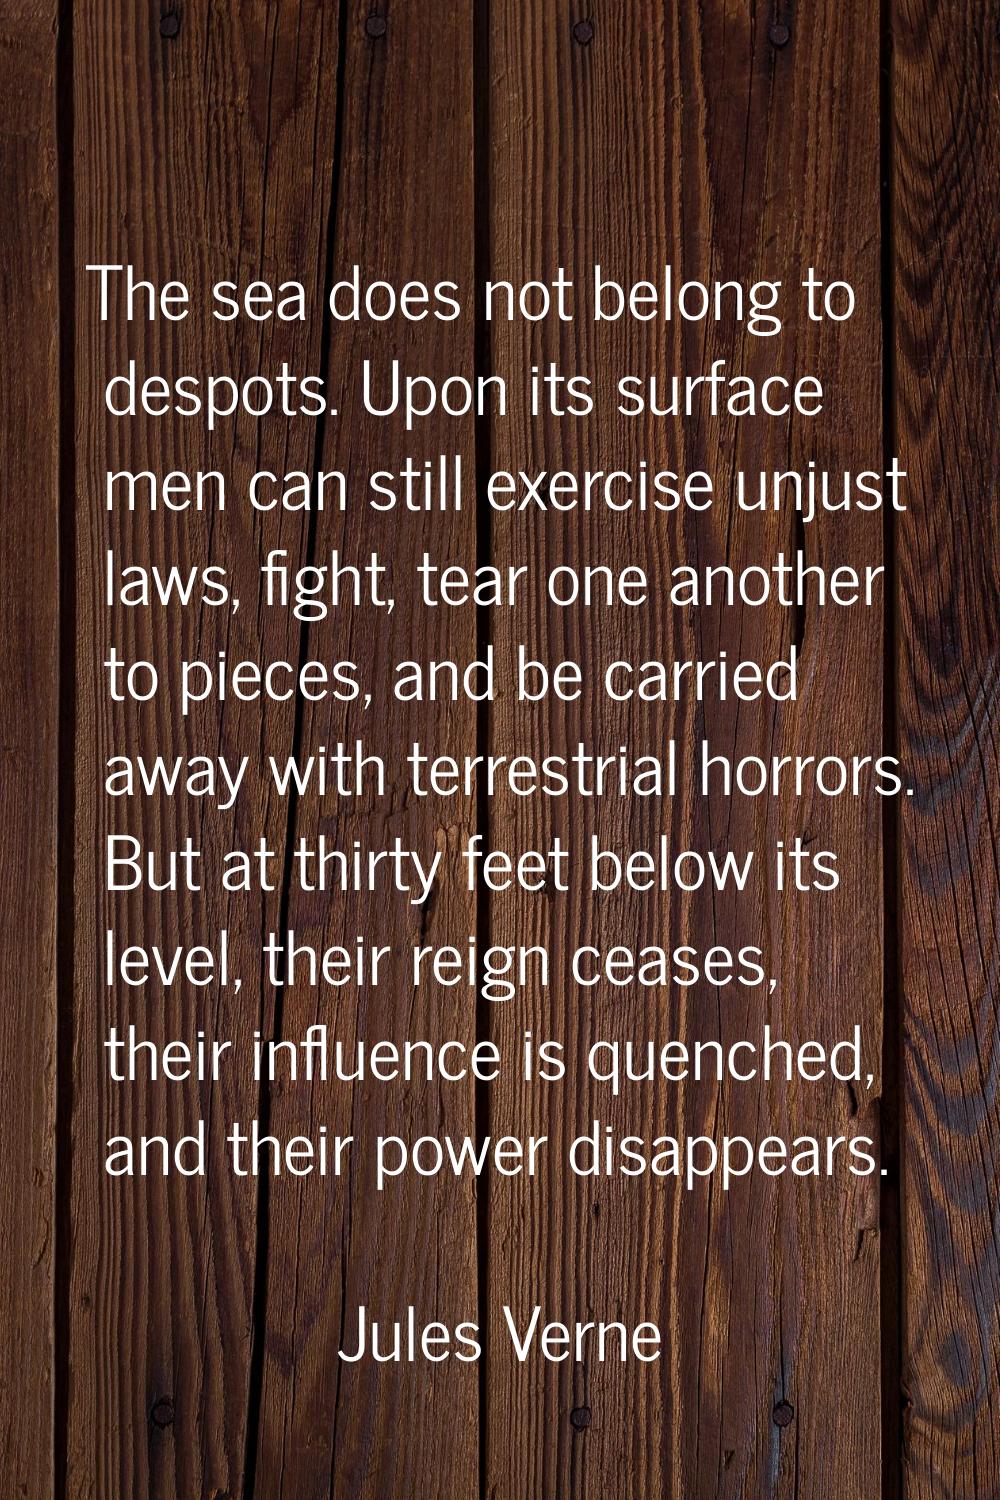 The sea does not belong to despots. Upon its surface men can still exercise unjust laws, fight, tea